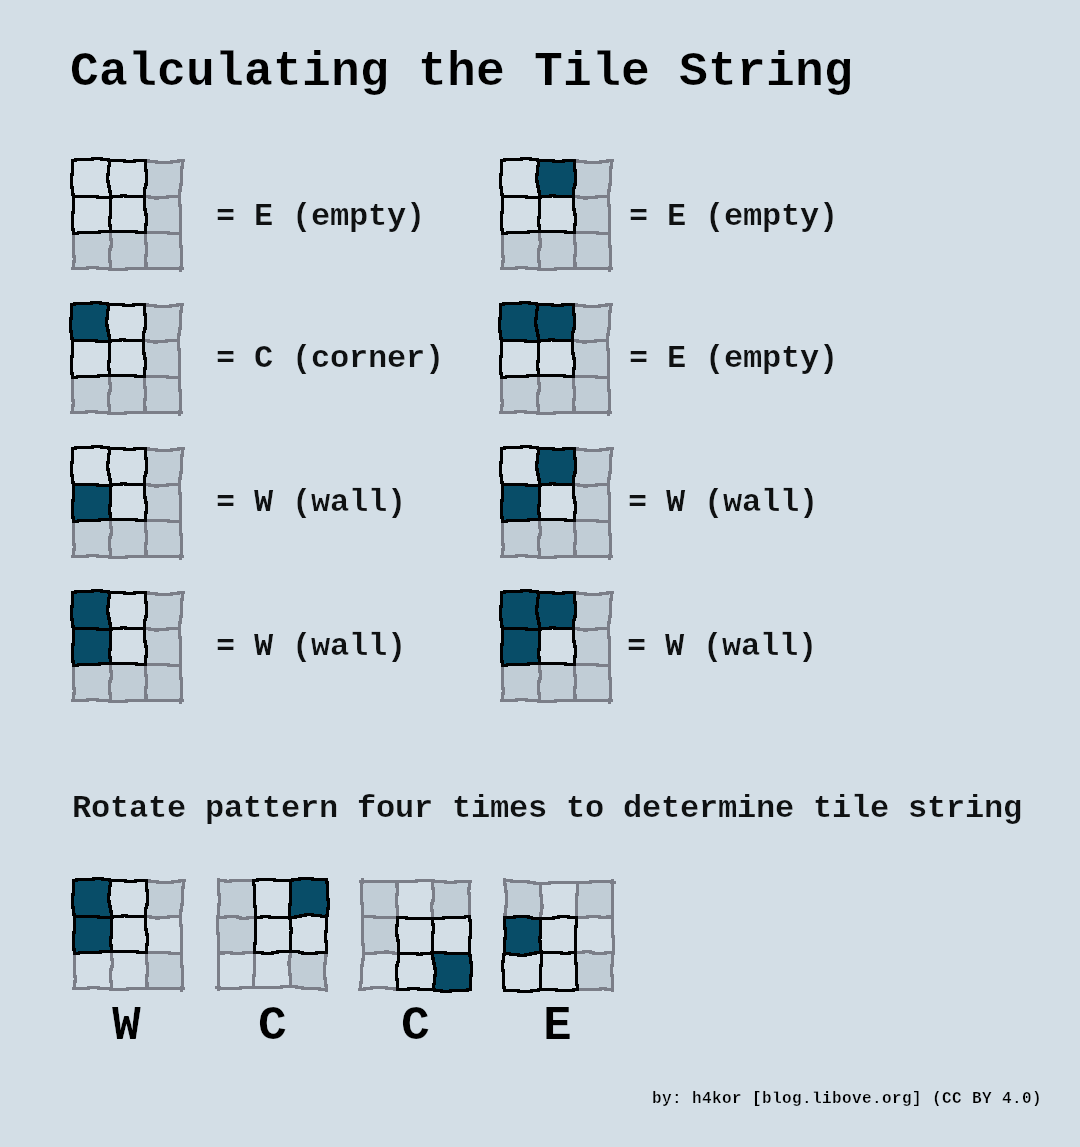 Calculating the Tile String.